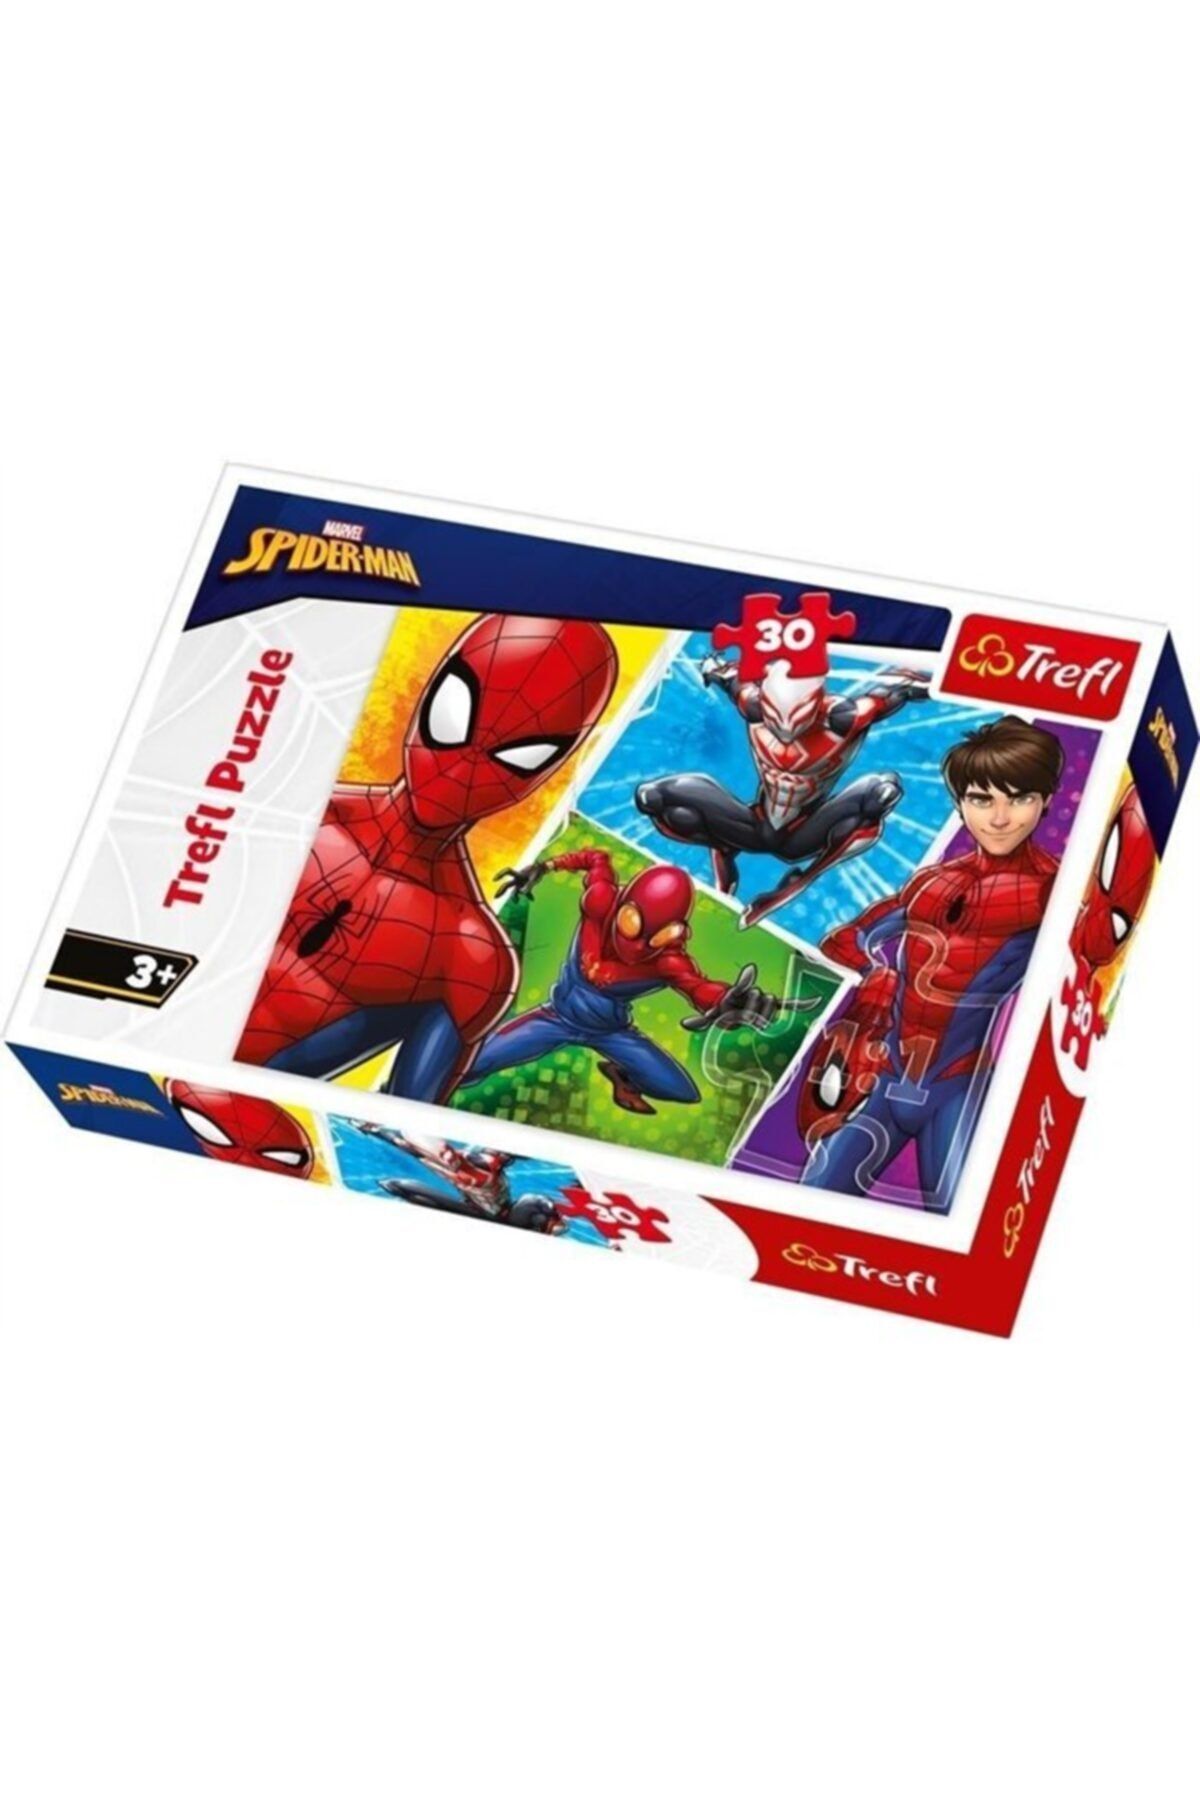 ⭐TREFL SPIDERMAN Puzzle Spidey, 30 pcs - buy in the online store Familand